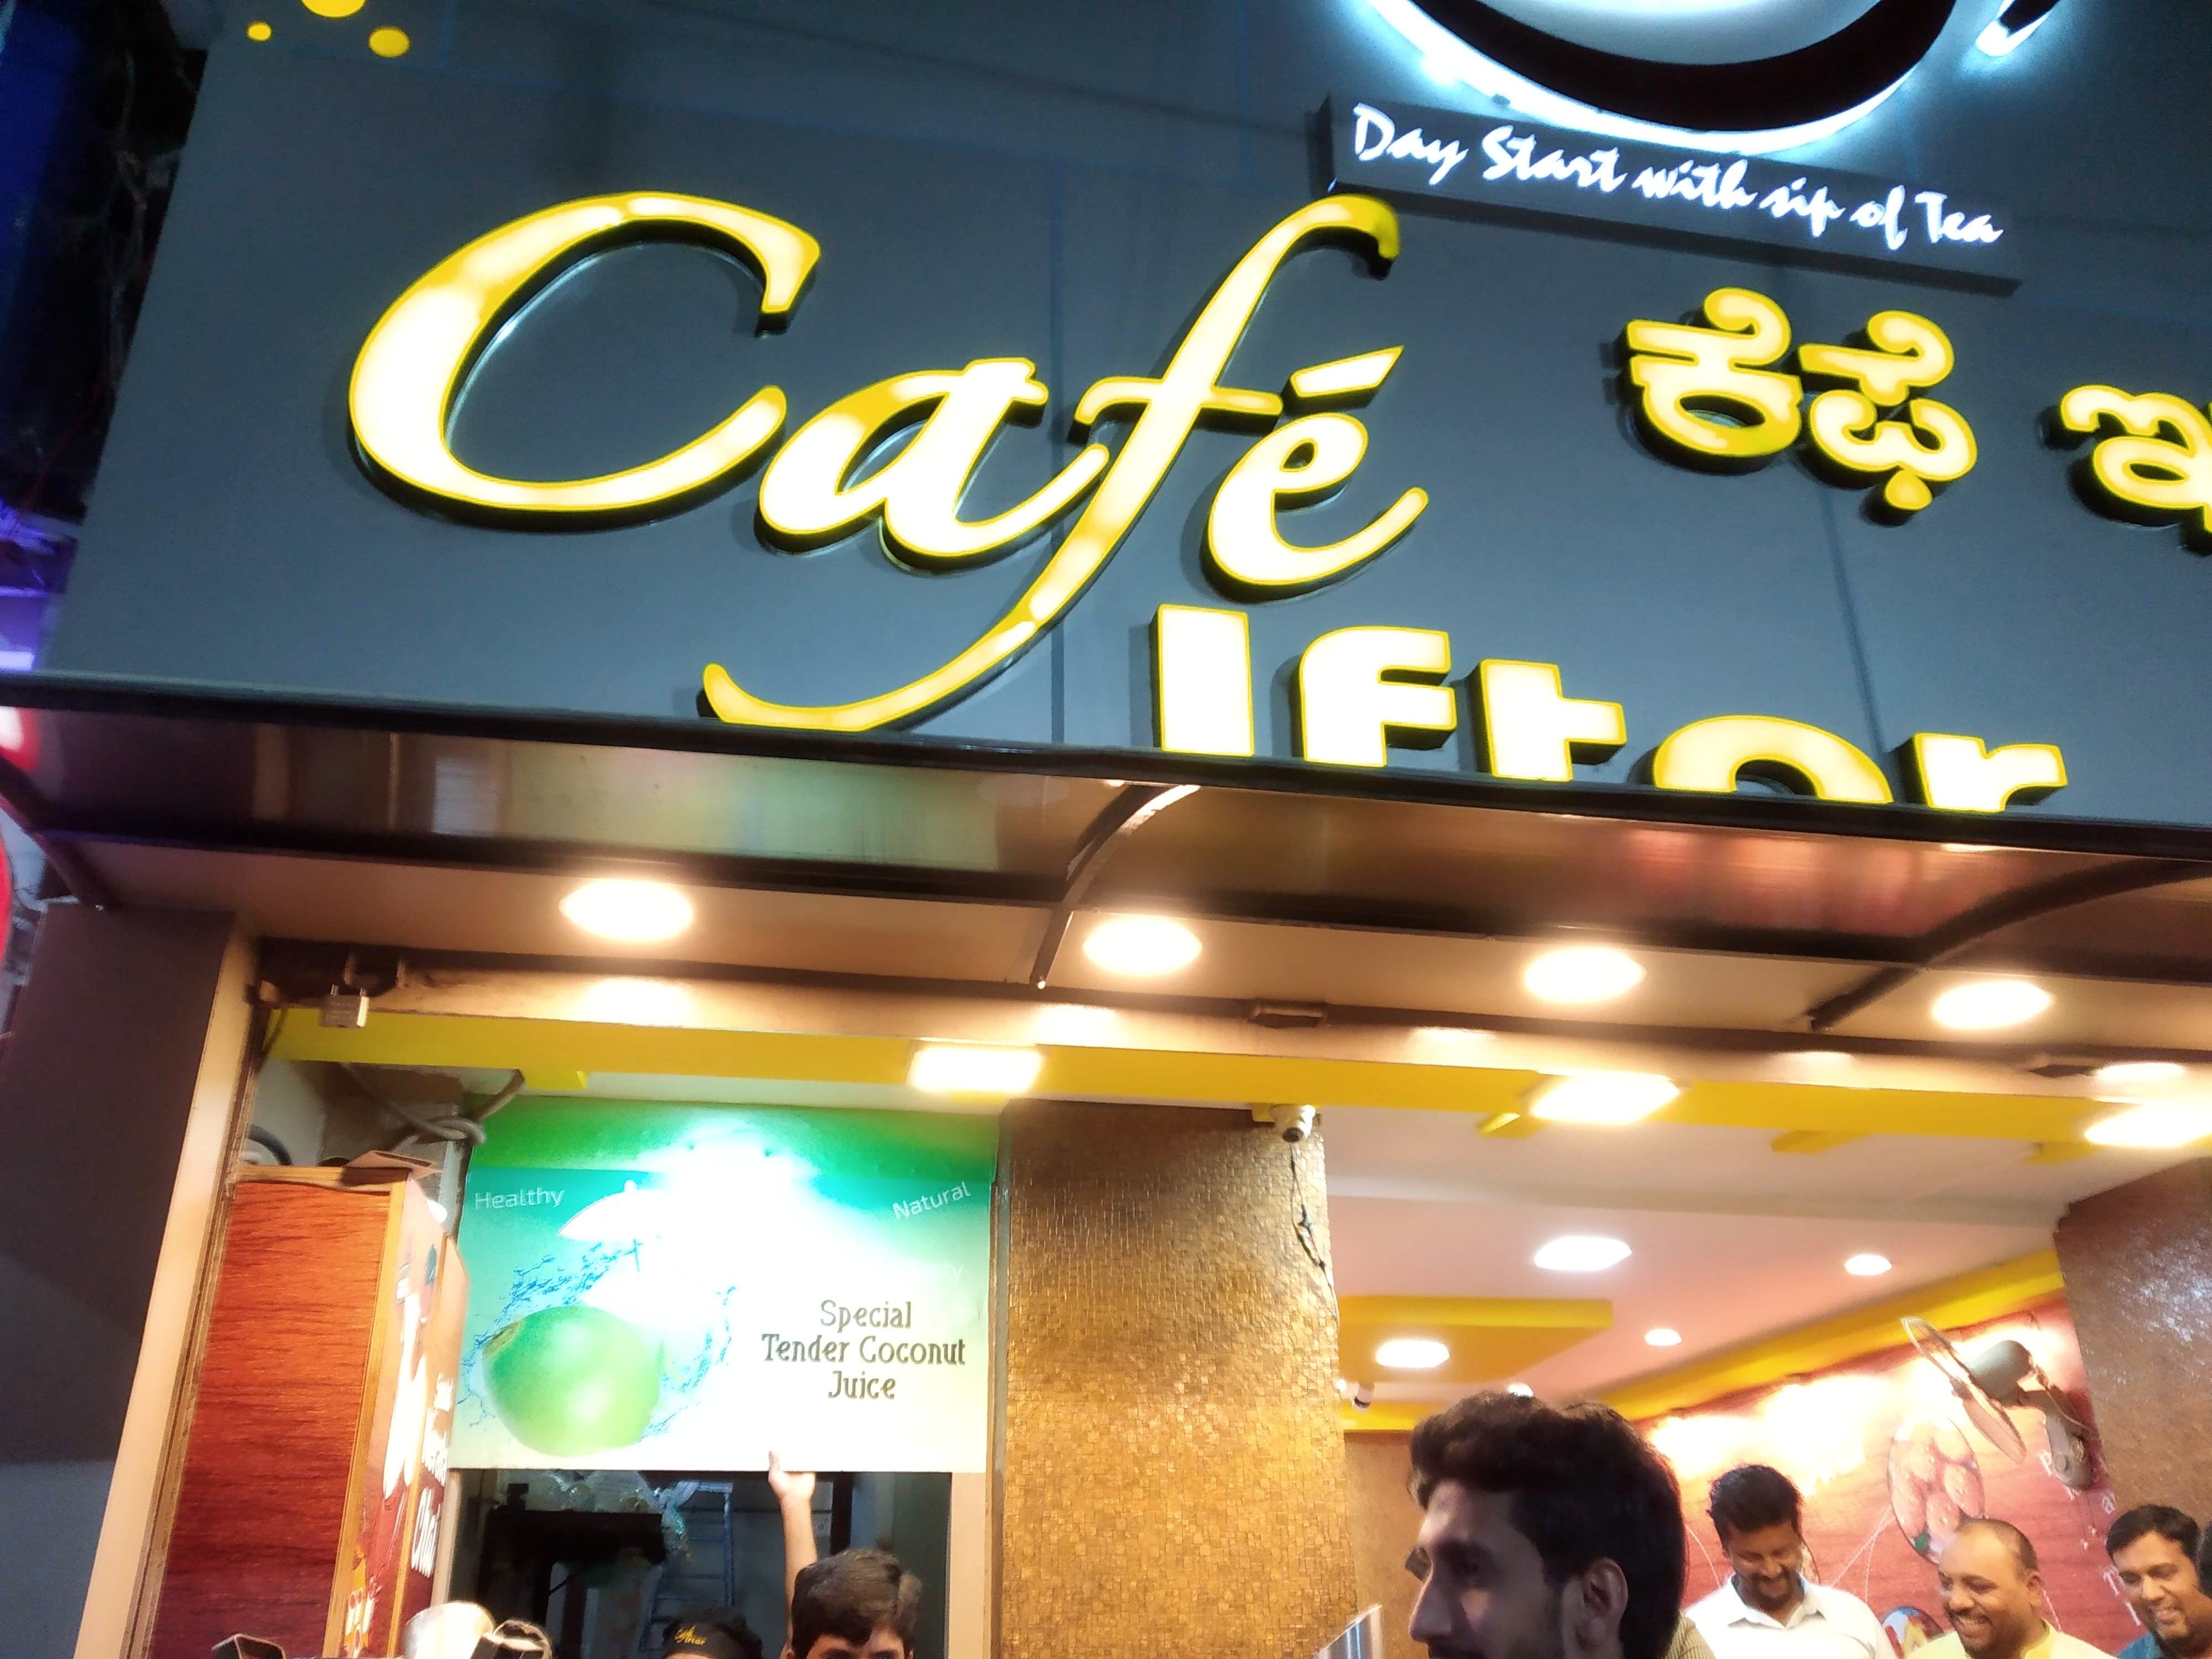 Check Out This Place That Serves Great Food From Kerala!